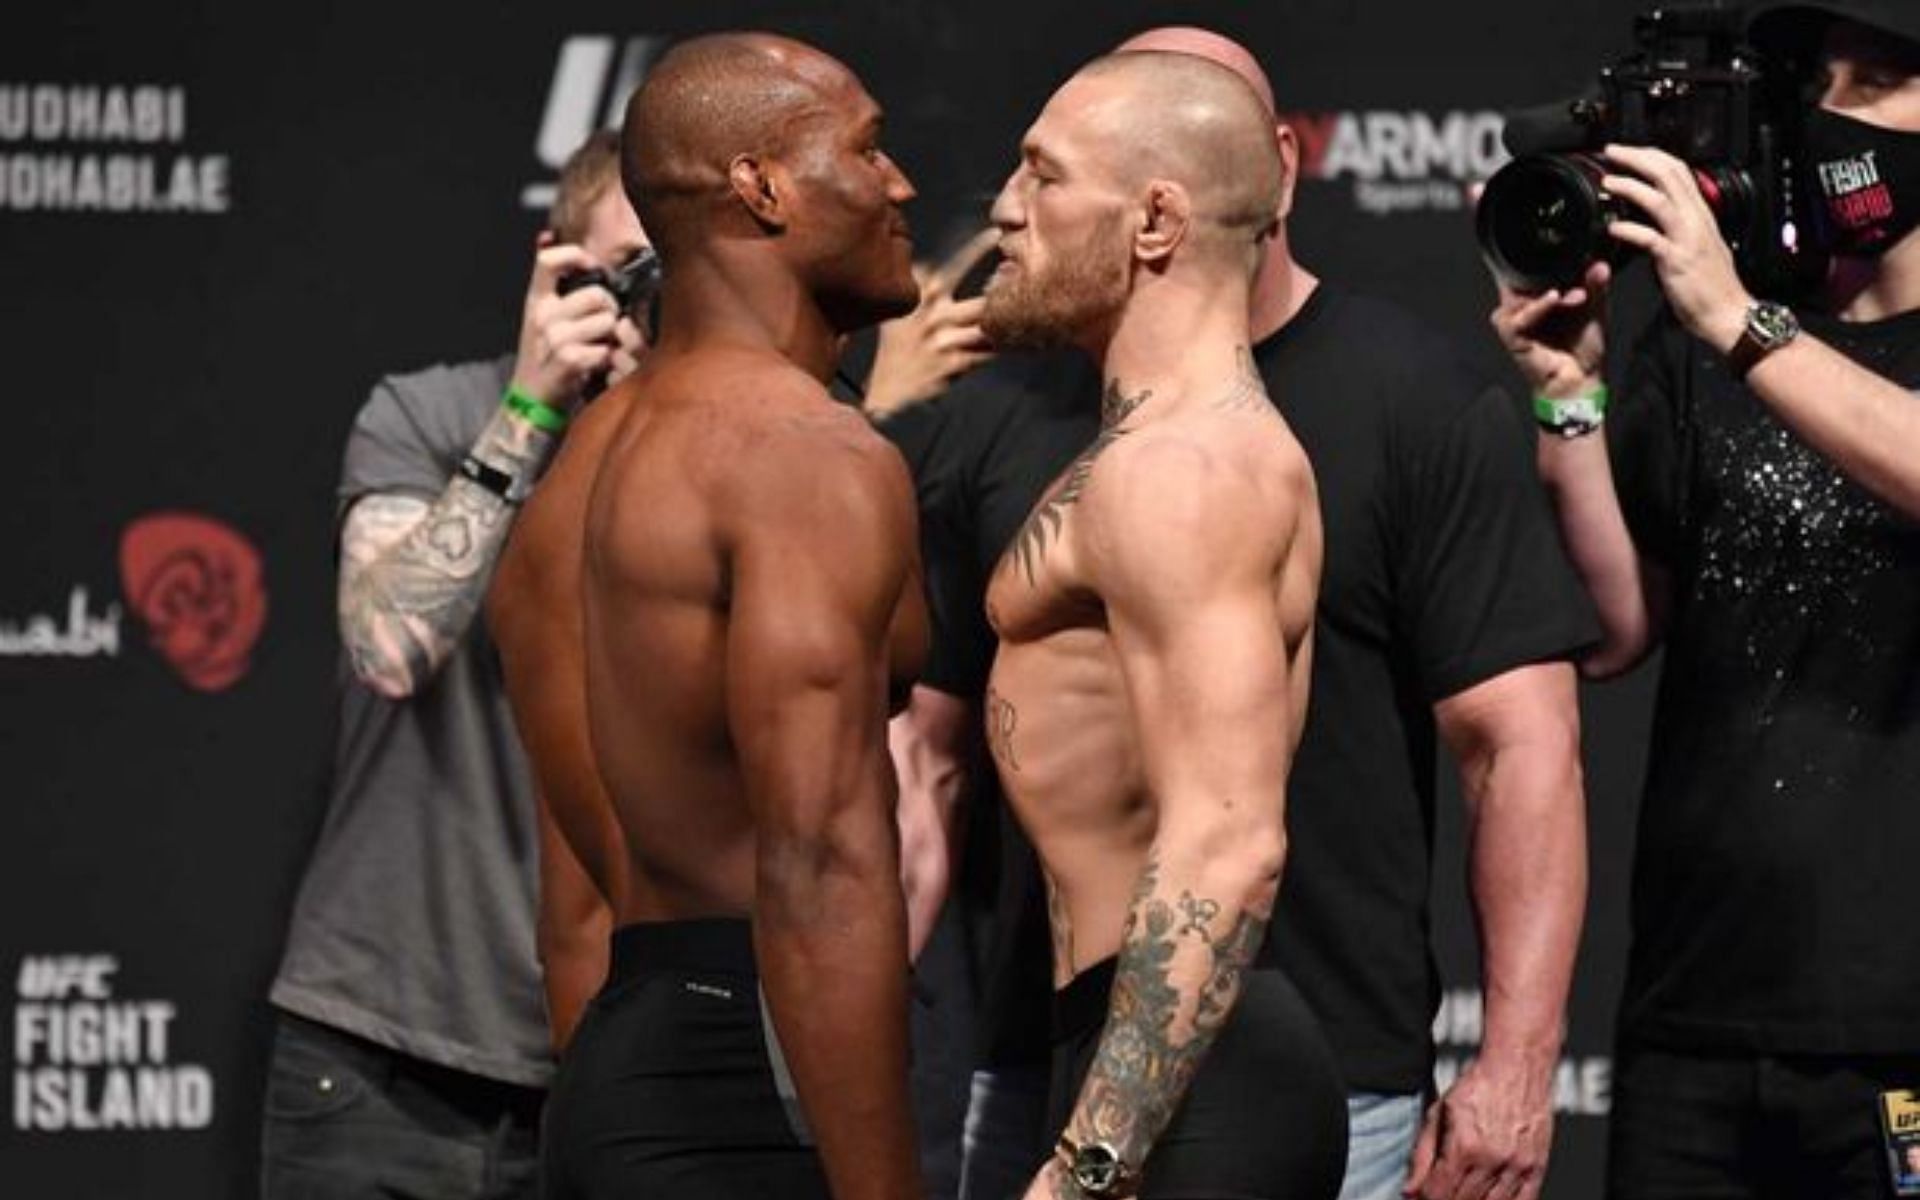 Should the UFC really book a fight between Kamaru Usman and Conor McGregor? (Image Credit: The Mirror)